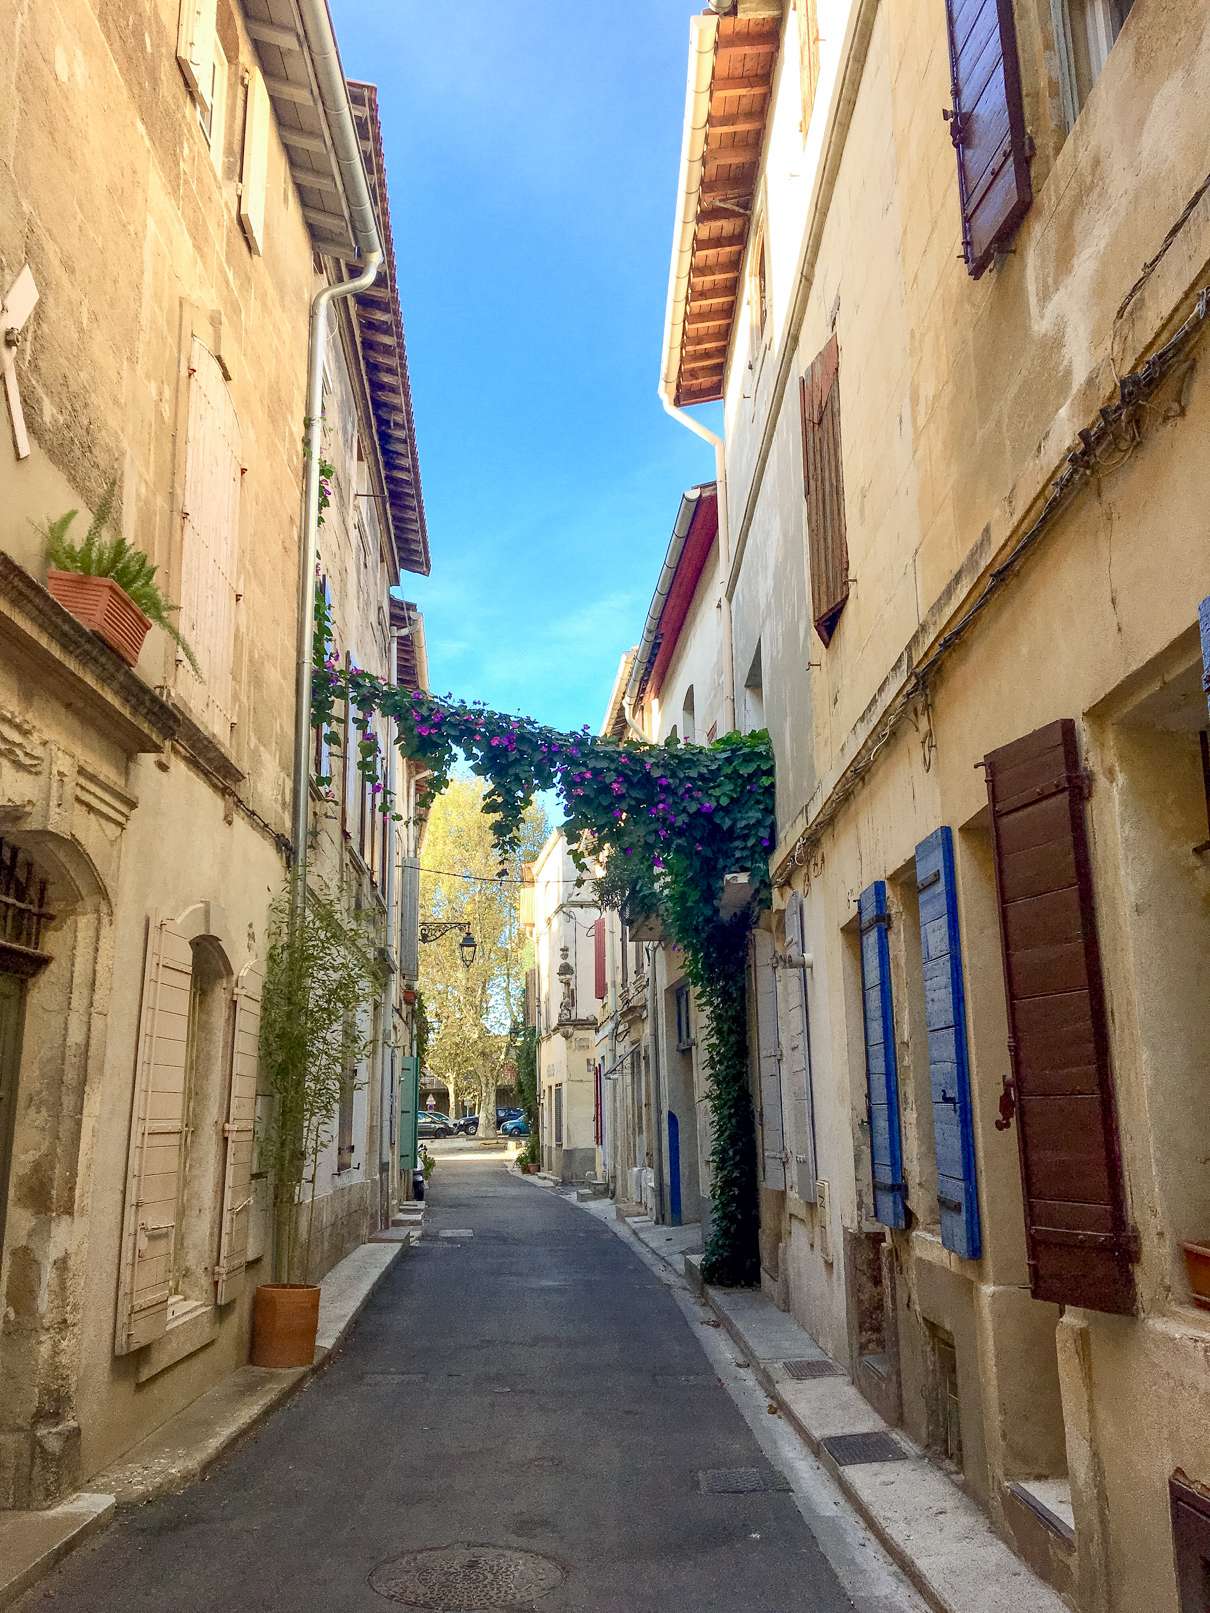 Colourful side street in Arles